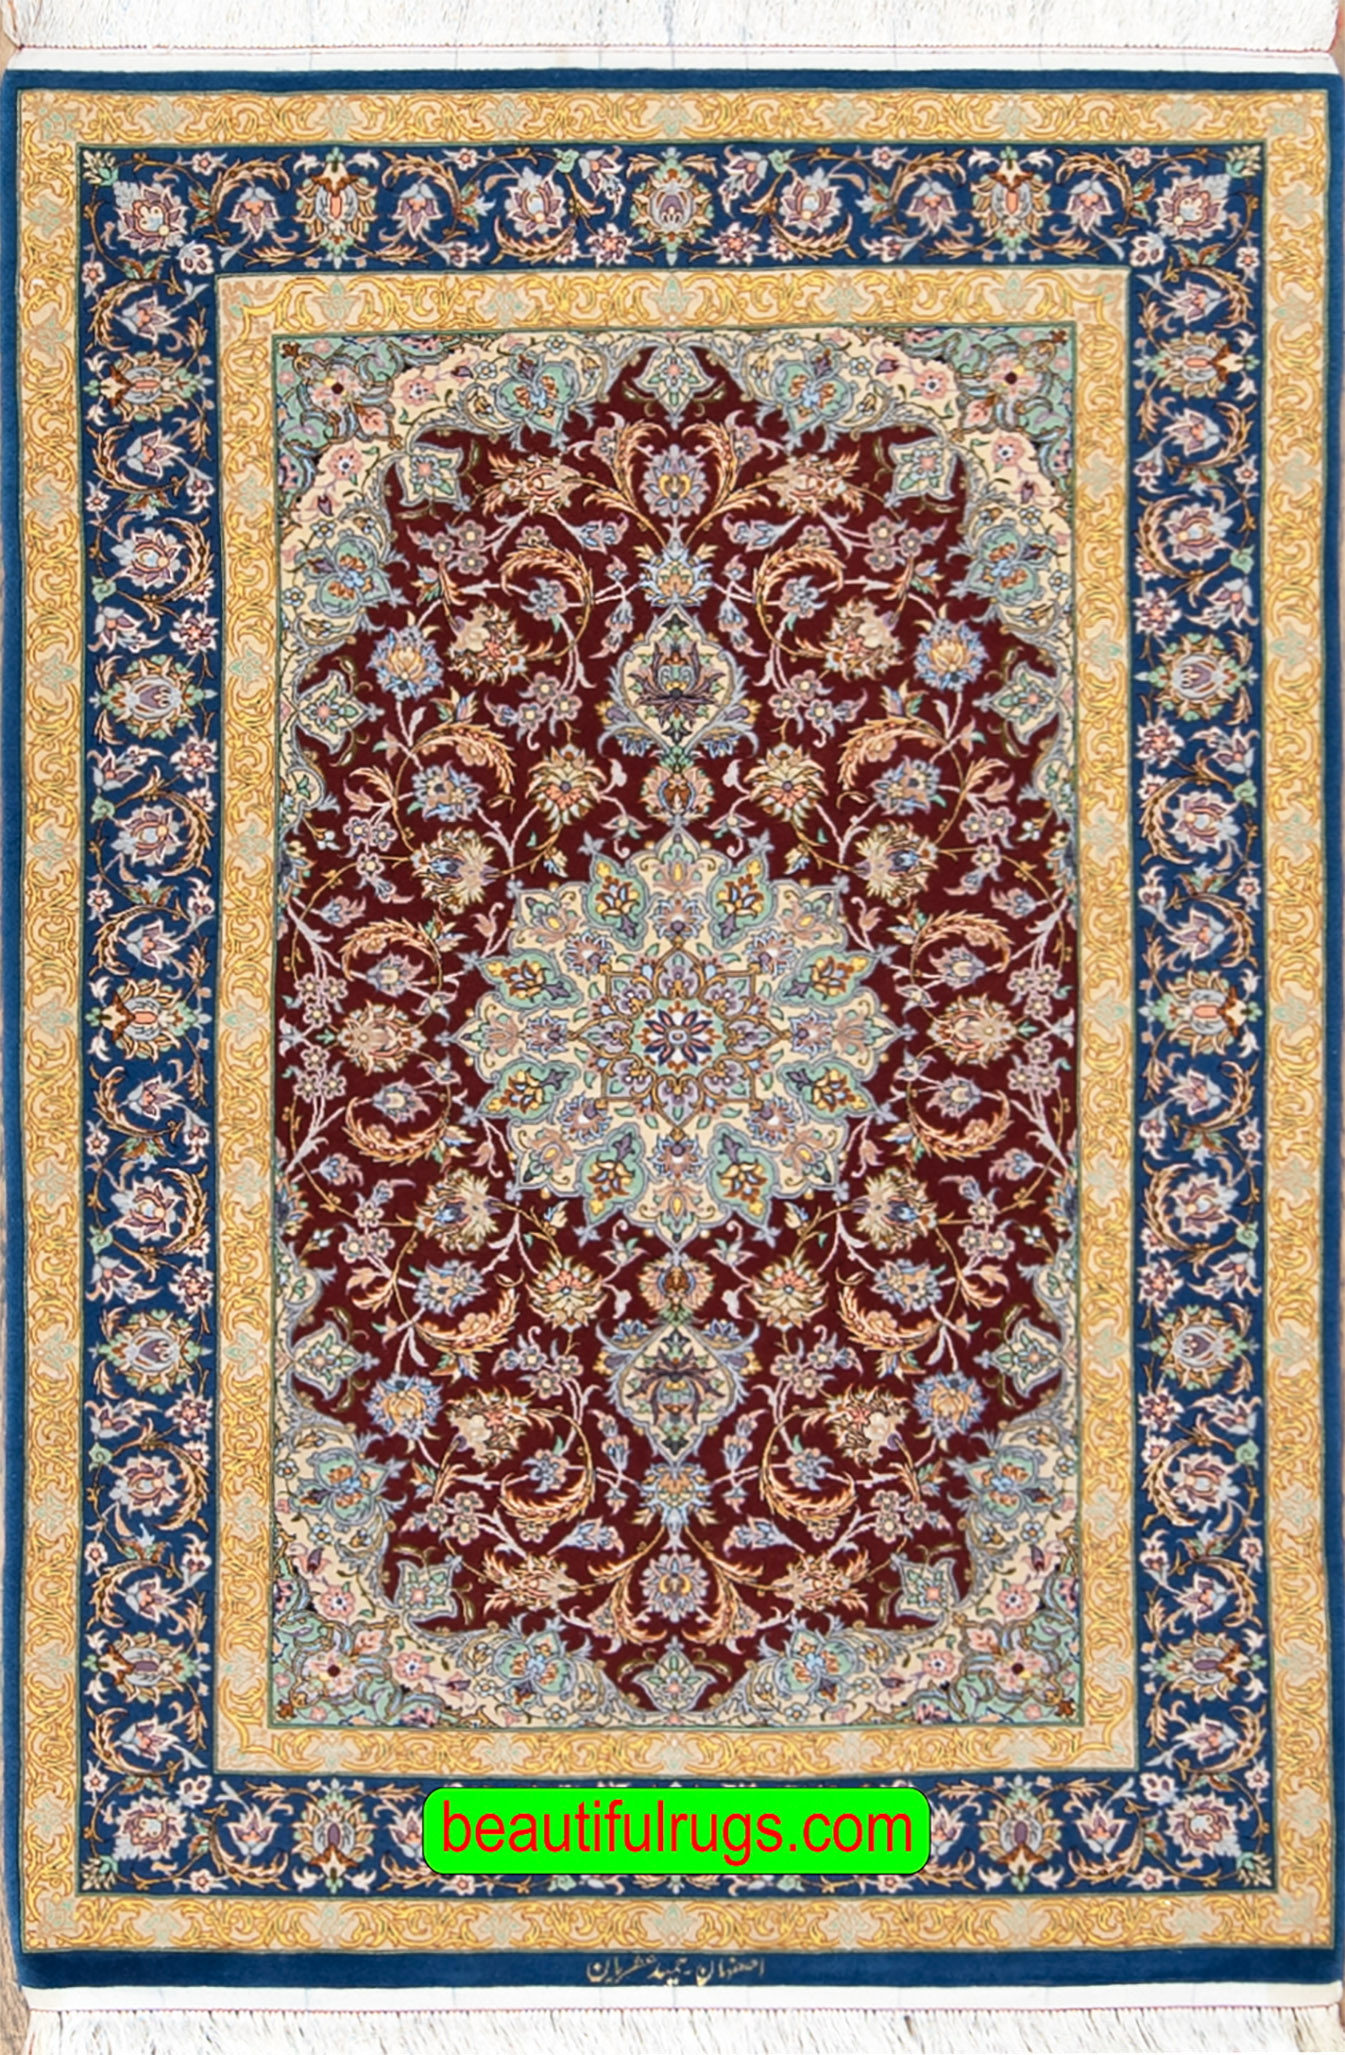 Colorful vegetable dyed Persian Isfahan rug, kork wool and silk rug. Size 3.6x5.4.